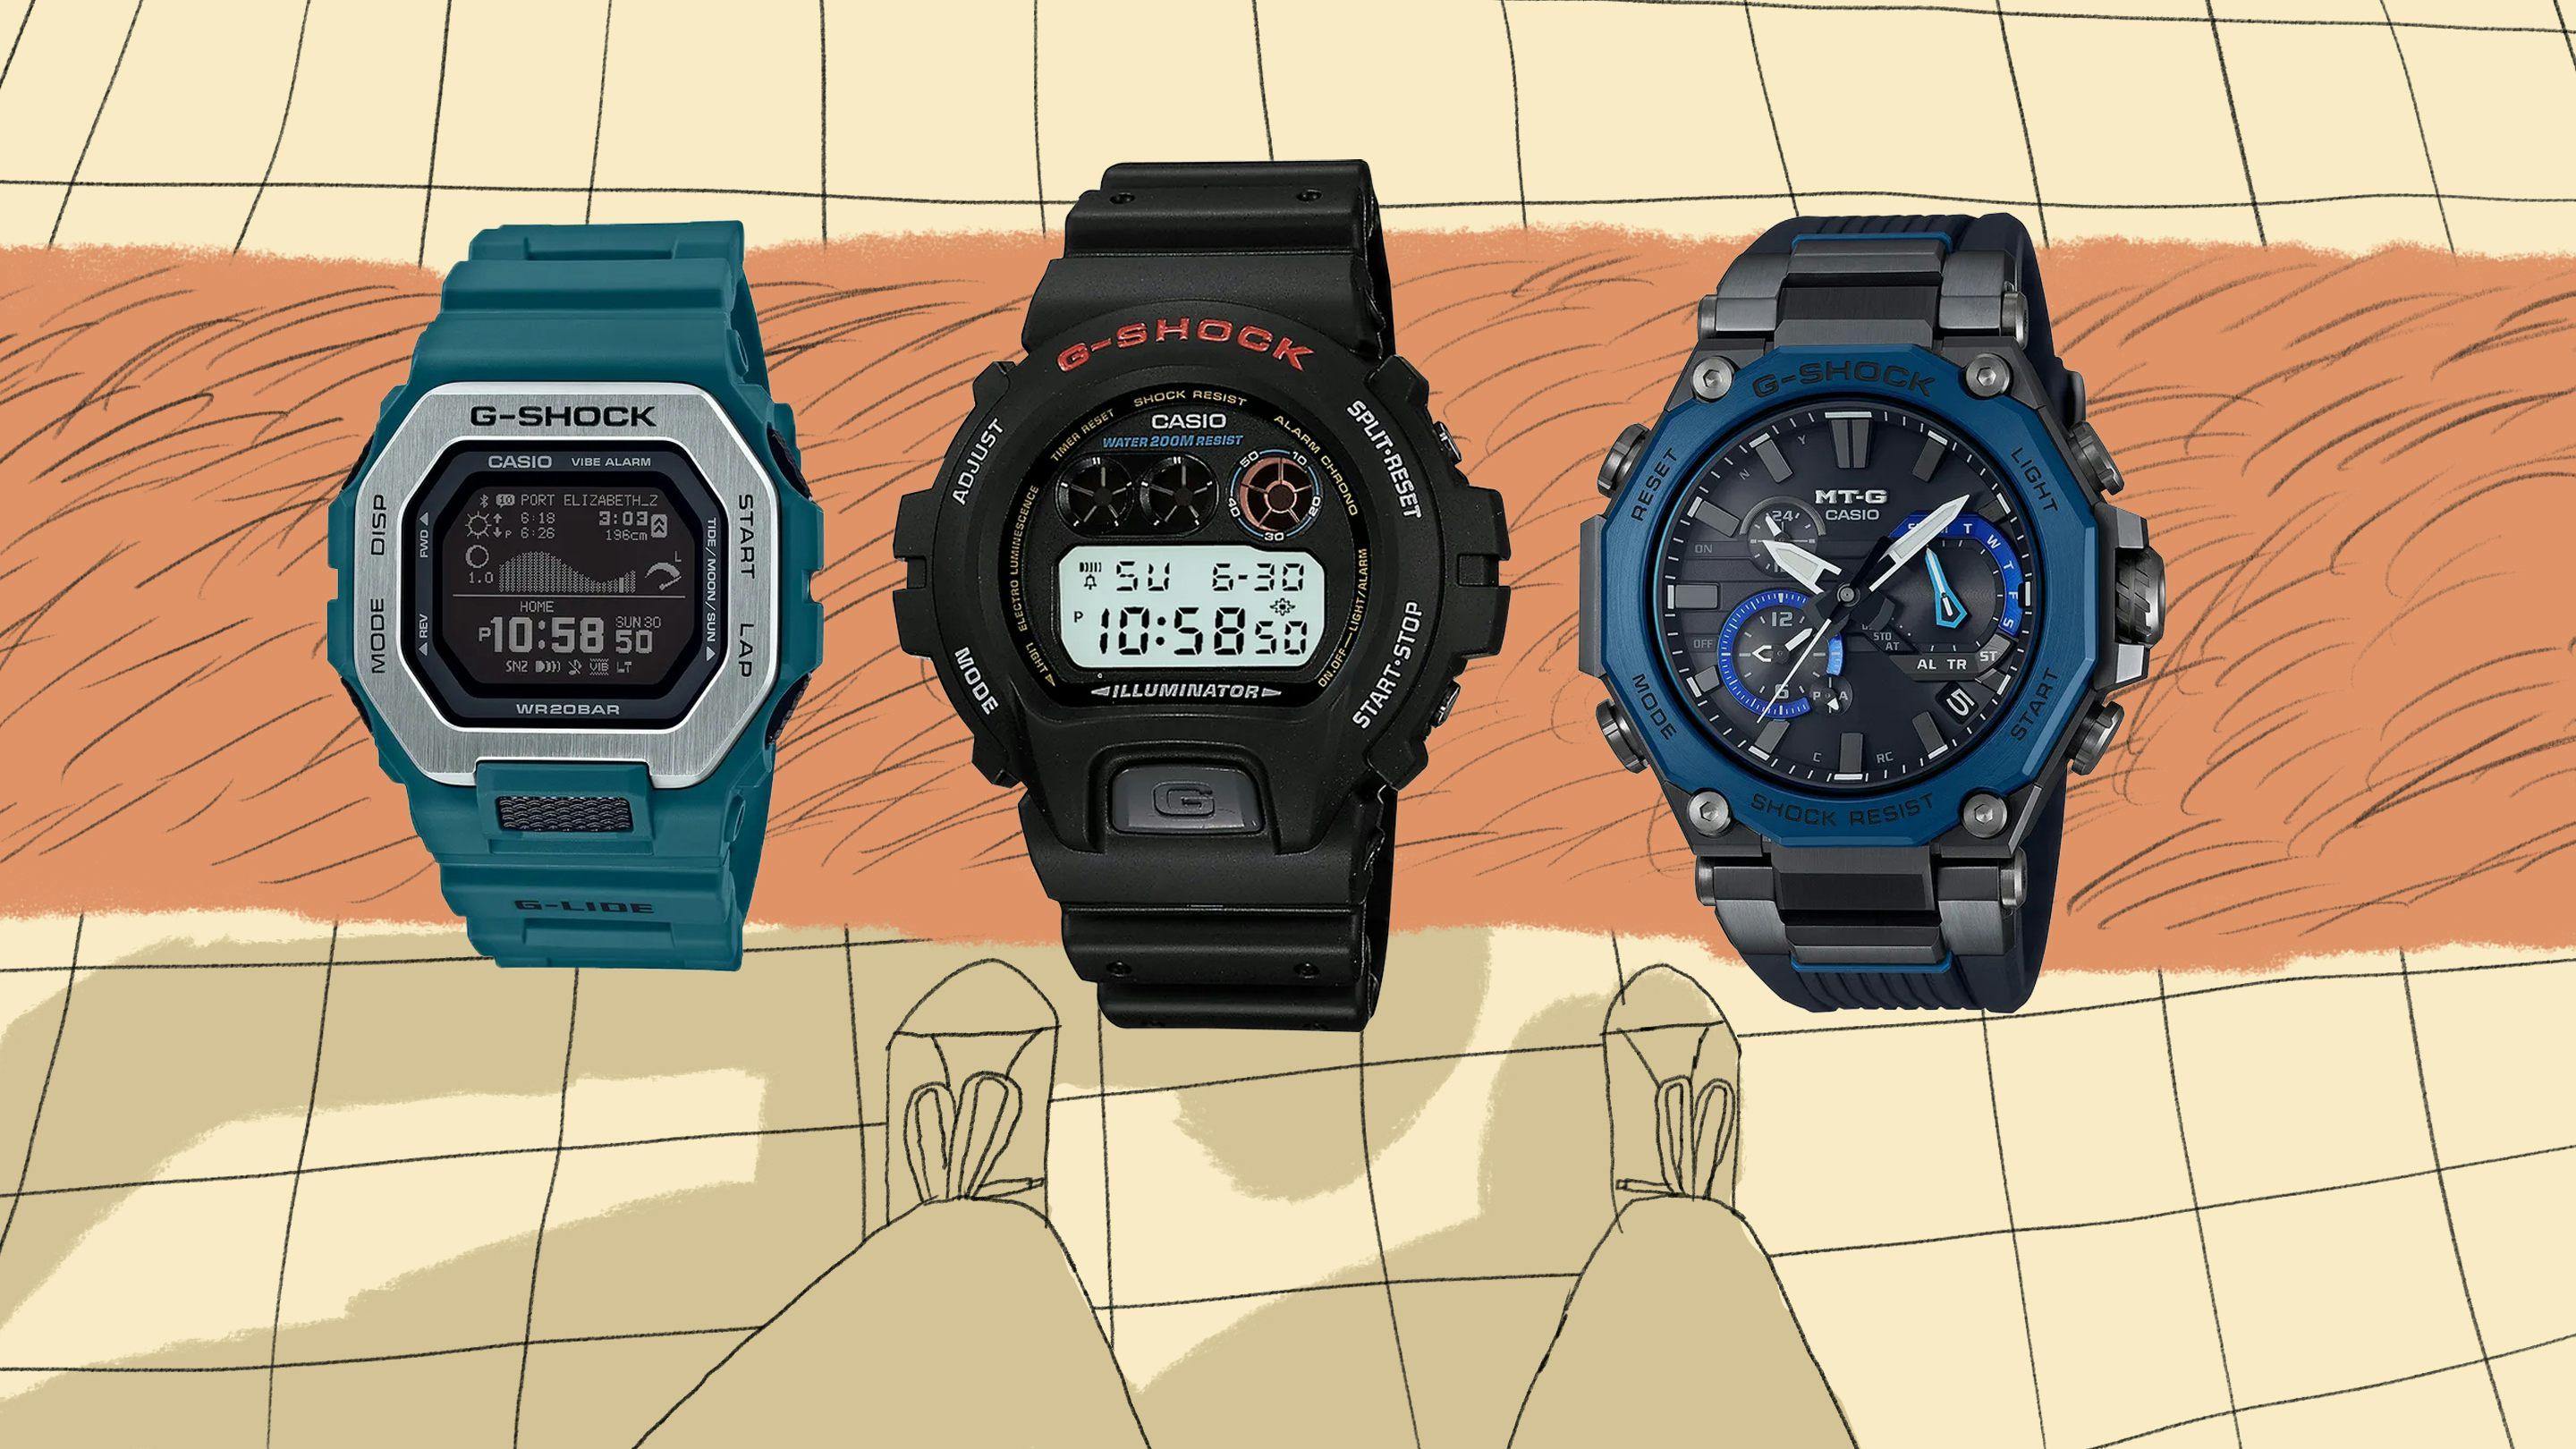 G-SHOCK Mudmaster Collection: Durable Tactical Watches